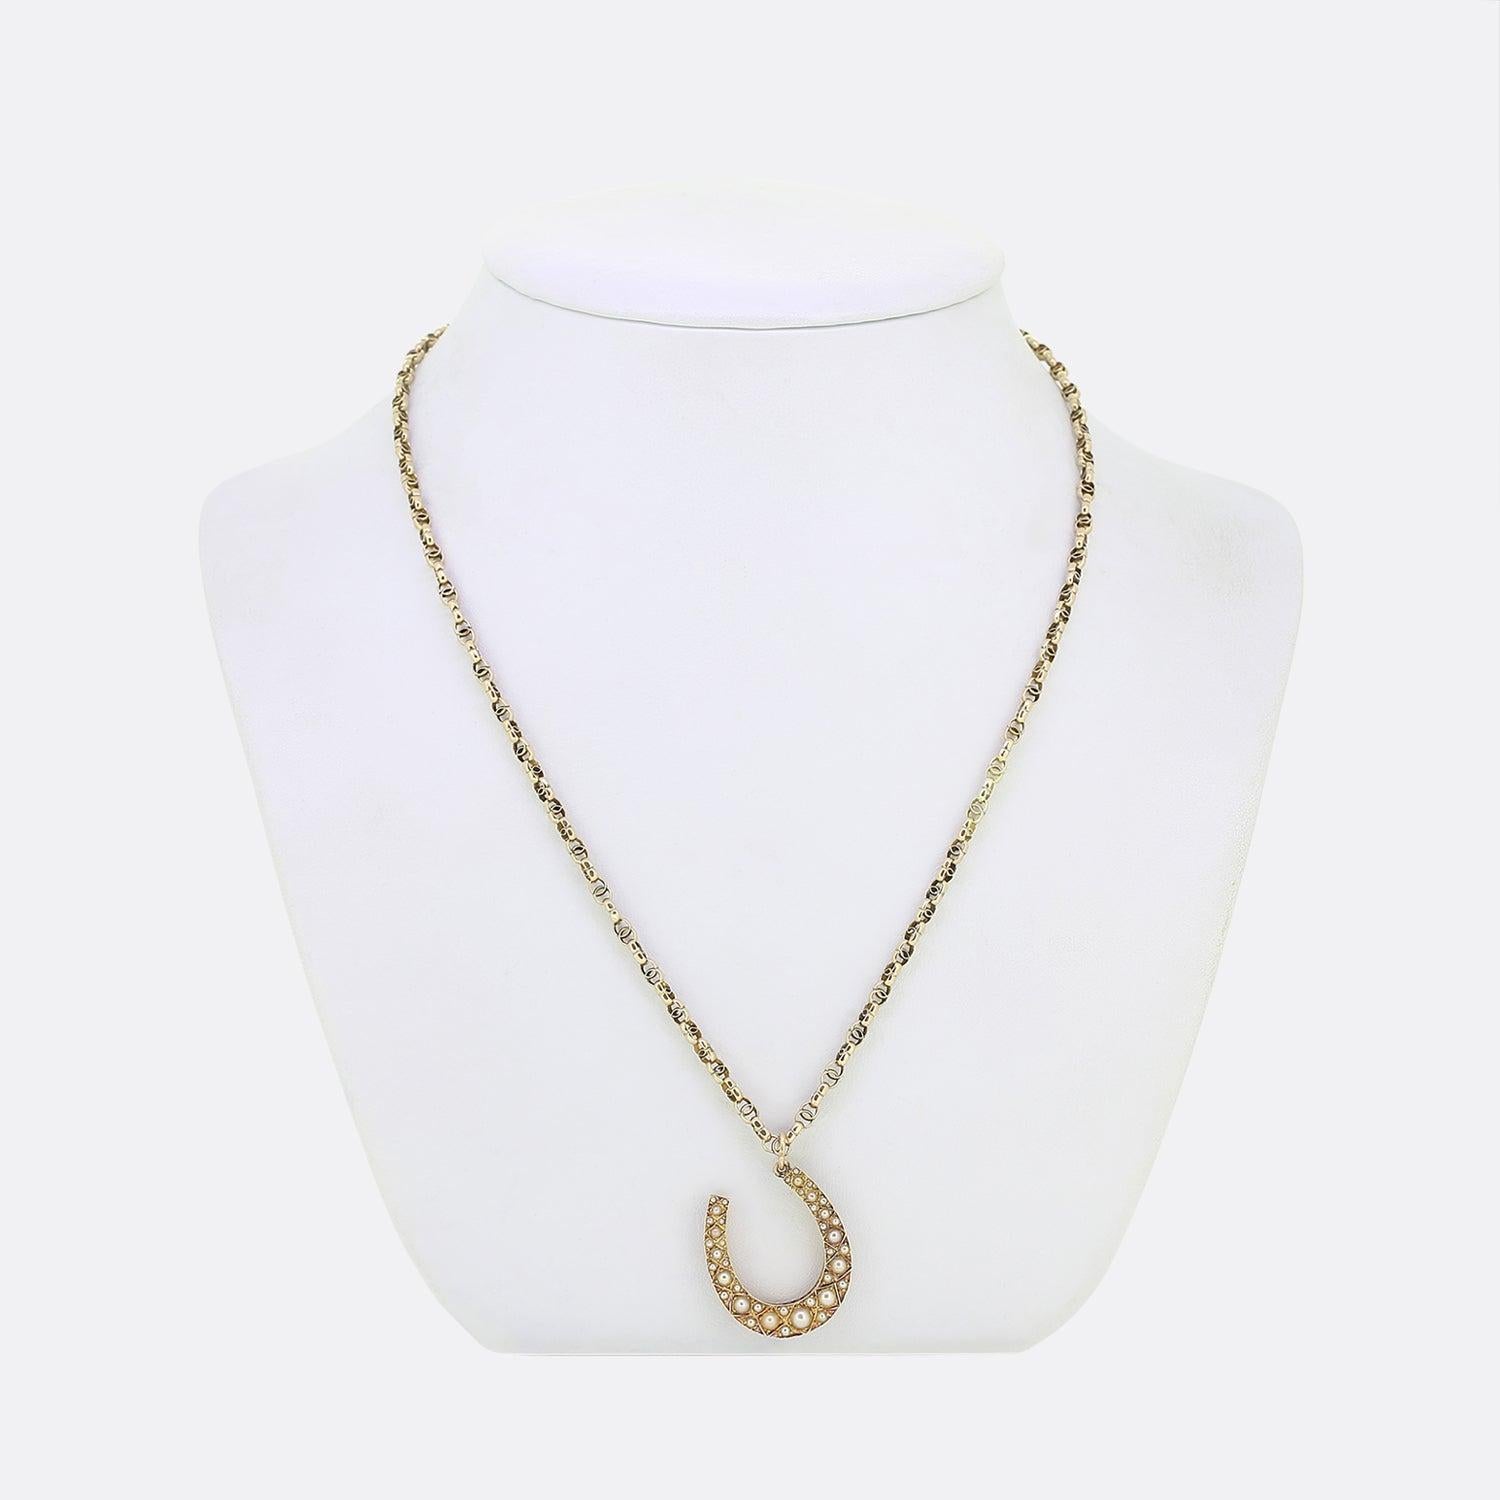 Here we have a charming necklace dating back to the Edwardian period. The pendant has been crafted from 15ct yellow gold into the shape of a lucky horseshoe and set with a vast array of round natural seed pearls which collectively graduate in size